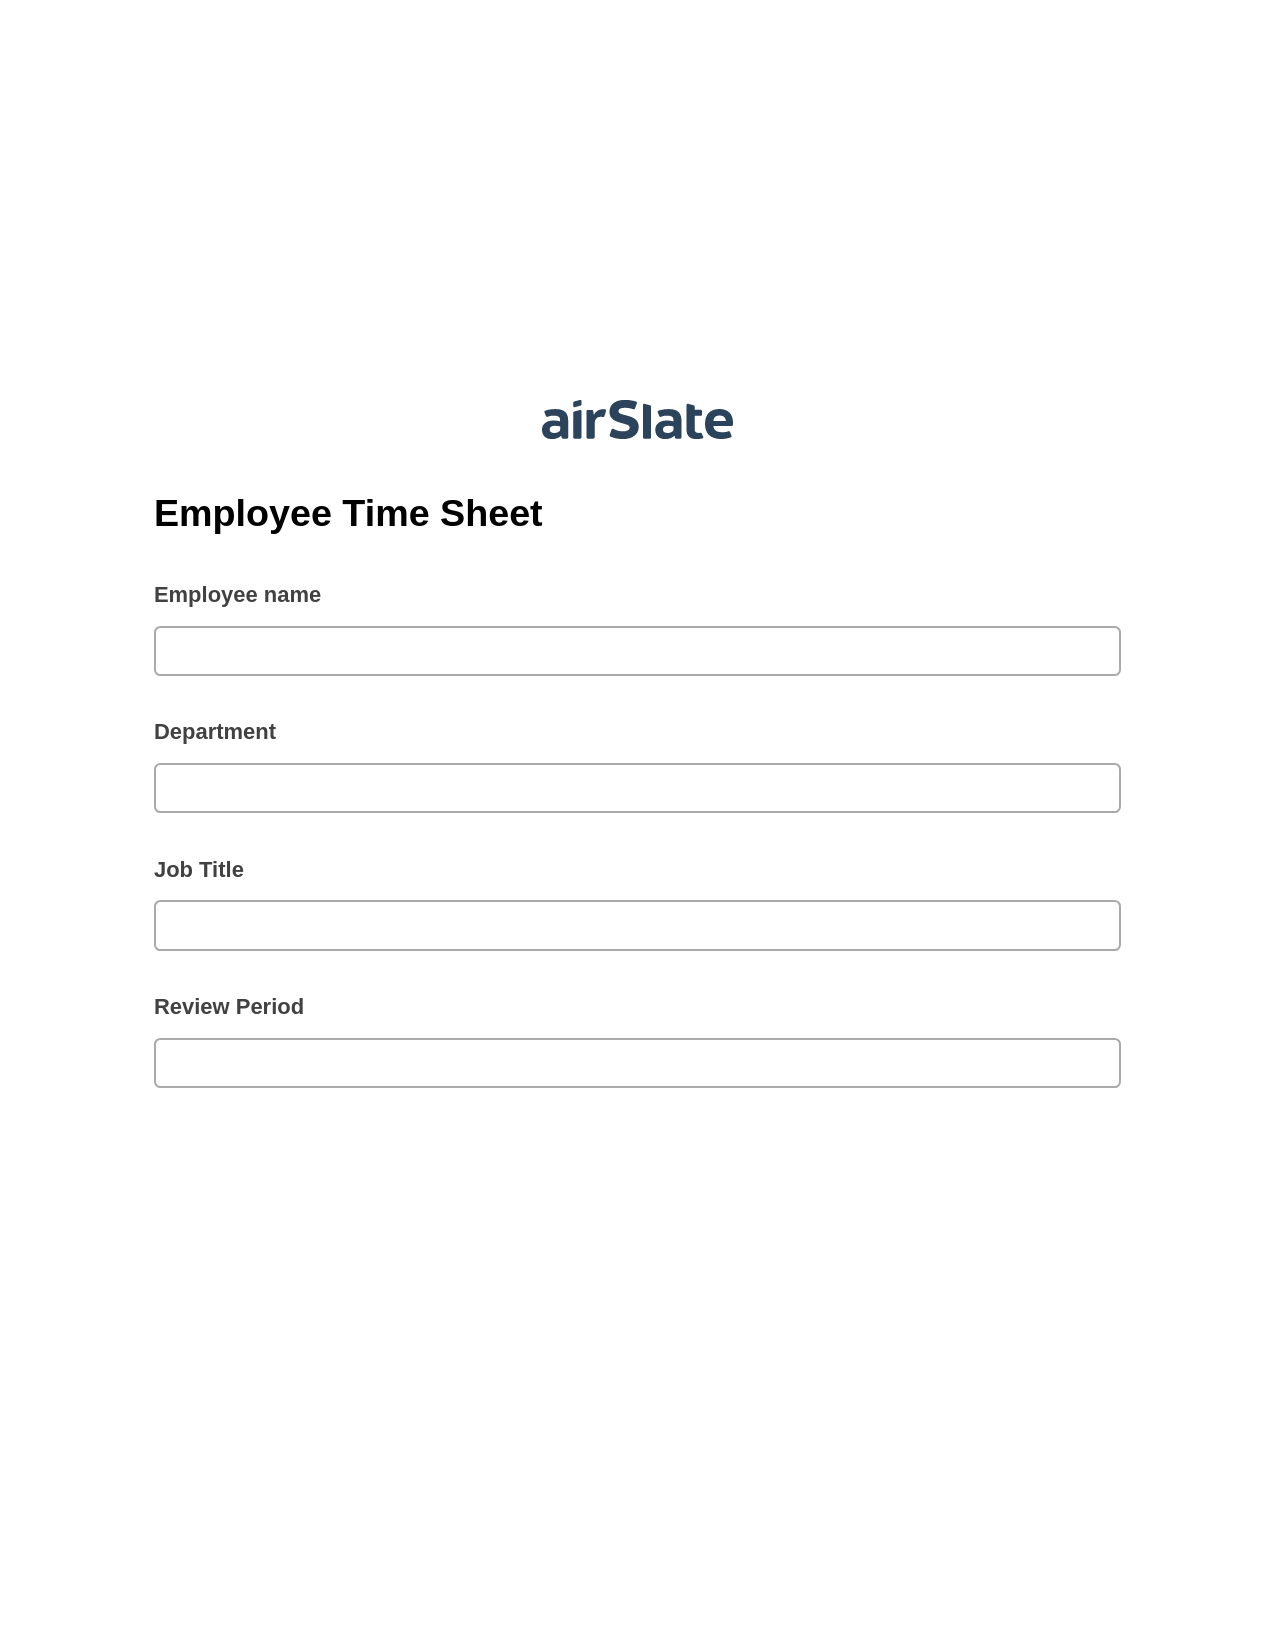 Multirole Employee Time Sheet Prefill from NetSuite records, Create Salesforce Records Bot, Email Notification Postfinish Bot